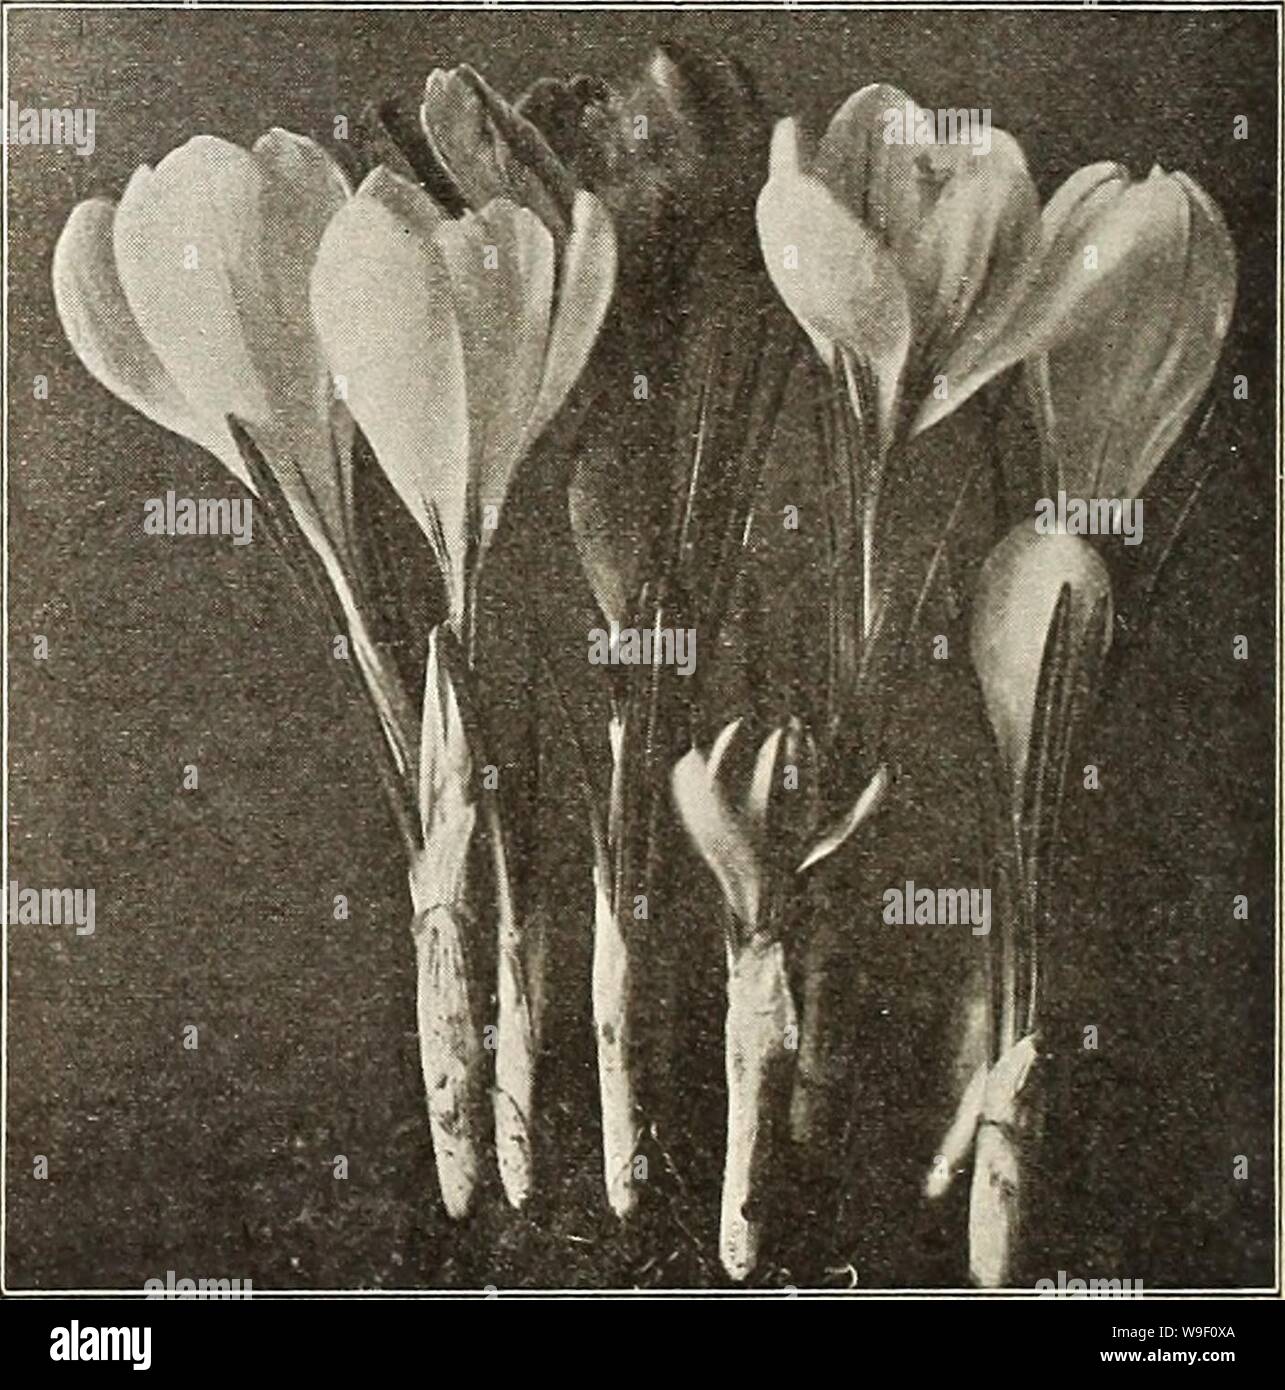 Archive image from page 7 of Currie's bulbs and plants . Currie's bulbs and plants : autumn 1916  curriesbulbsplan19curr_9 Year: 1916 ( DOUBLE TULIP COURONNE D'OR. PARROT TULIPS Parrot tulips, so called because of their brilliant, parrot- like coloring, are large, fantastically showy flowers with curled and crested petals. They come into bloom about the middle of May and remain in bloom for a long time. Each Doz. 100 1000 Admiral ConstantinopleâRed $.03 $.30 $2.00 $15.00 Cramoisie BrilliantâDeep crimson, with large, black, star-shaped center LuteaâYellow PerfectaâYellow and scarlet Finest Mixe Stock Photo